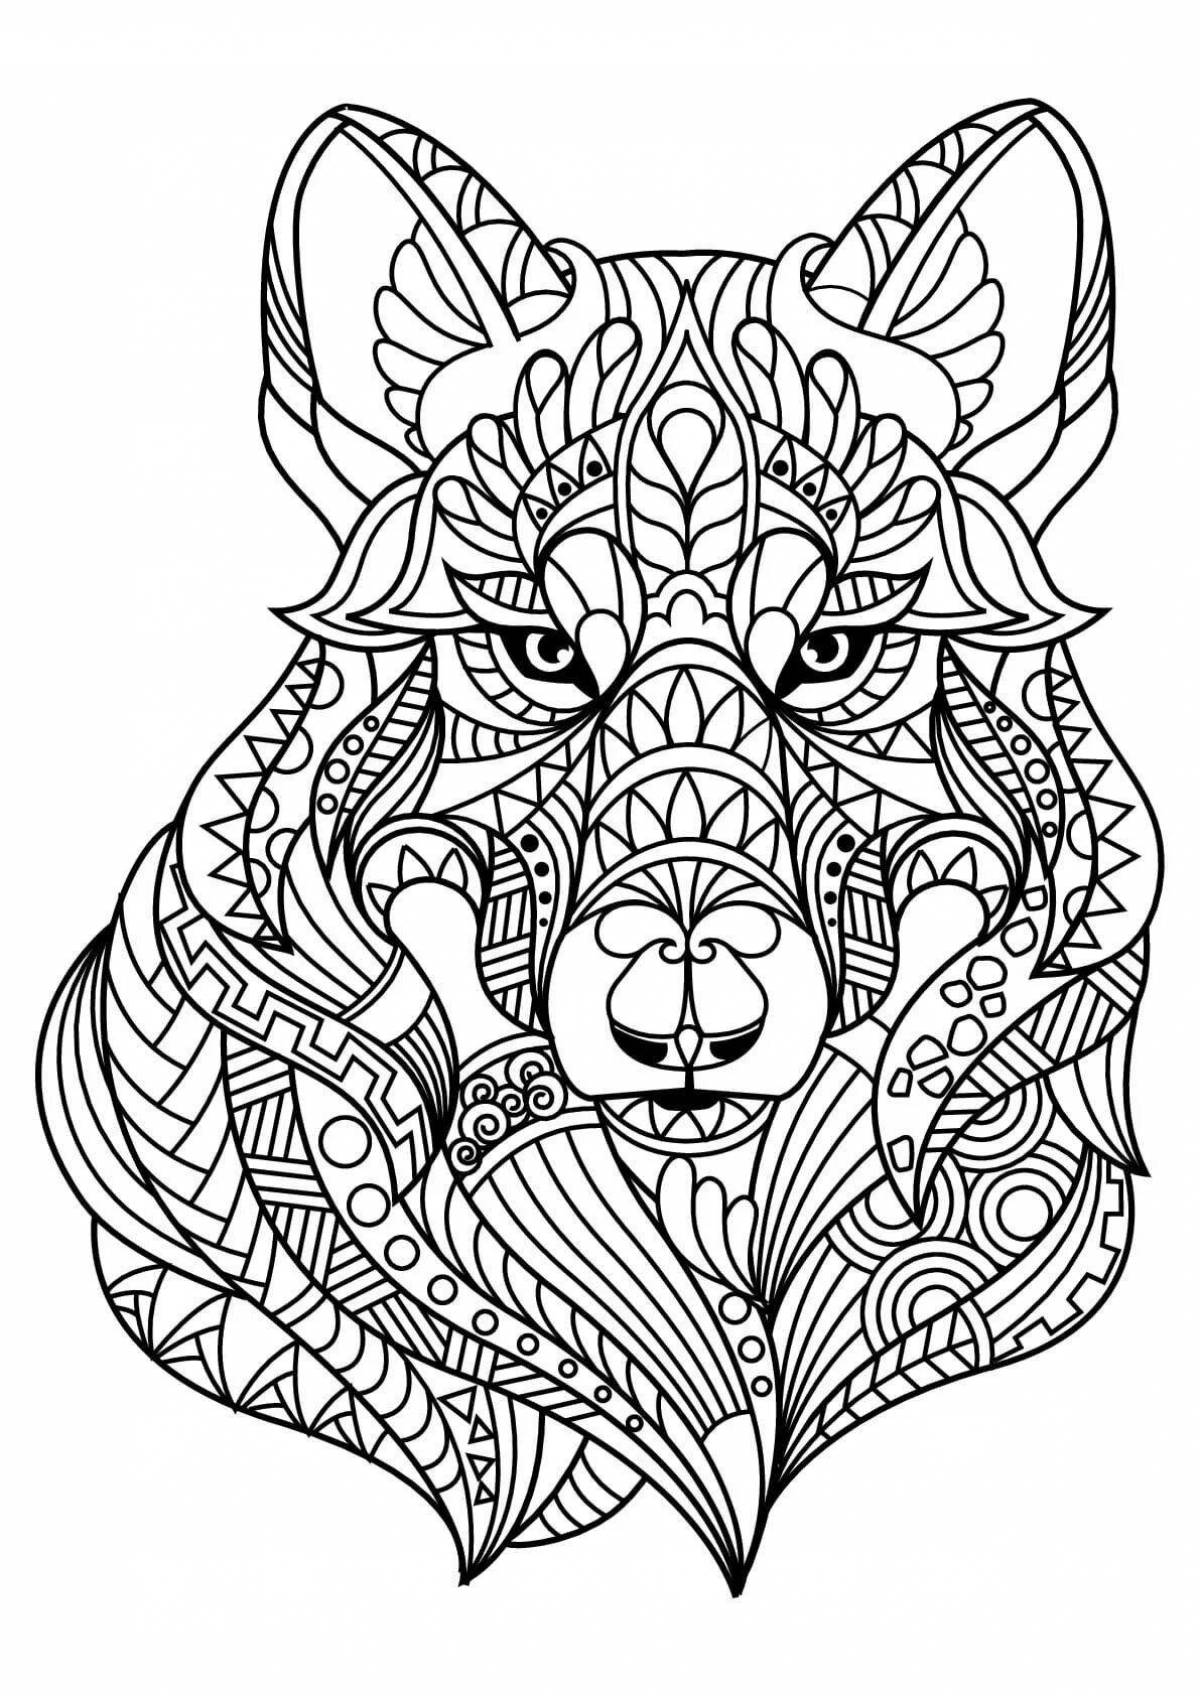 Creative coloring book for adults and children